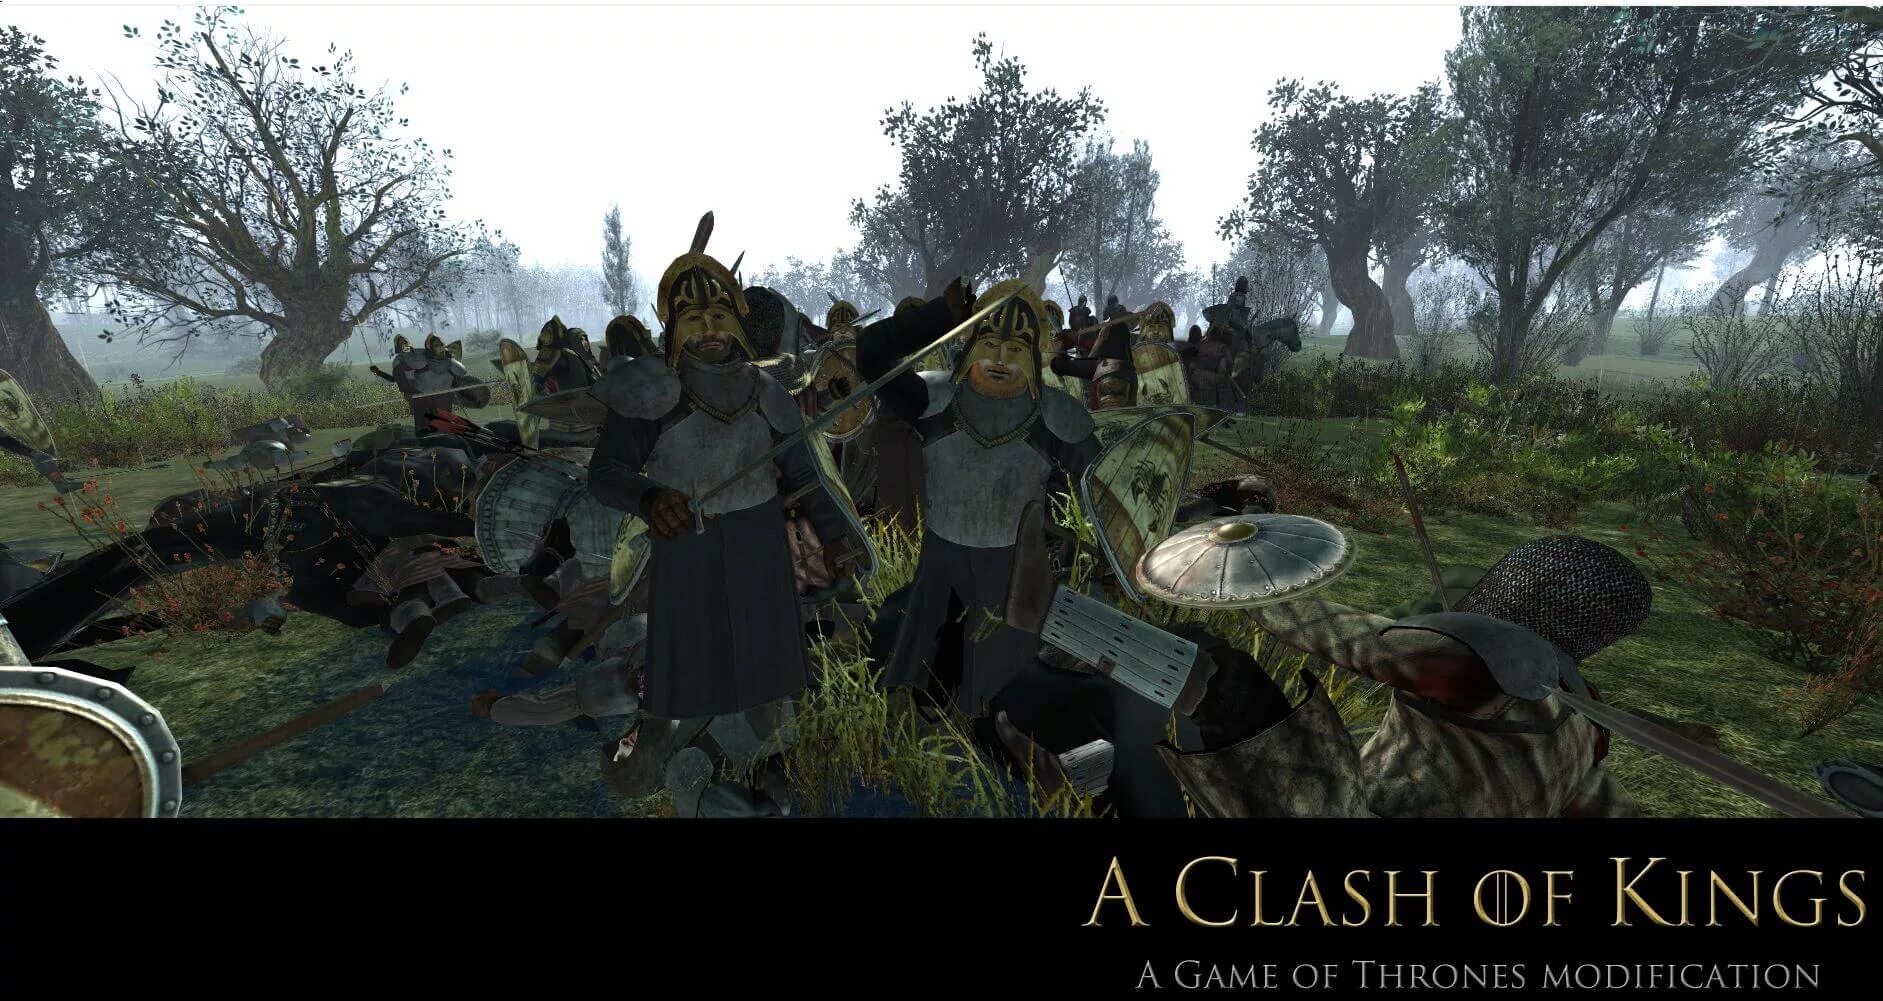 Mount and Blade a Clash of Kings 8.0. Mount & Blade Warband "a Clash of Kings 4.1 (Rus). Warband игры престолов